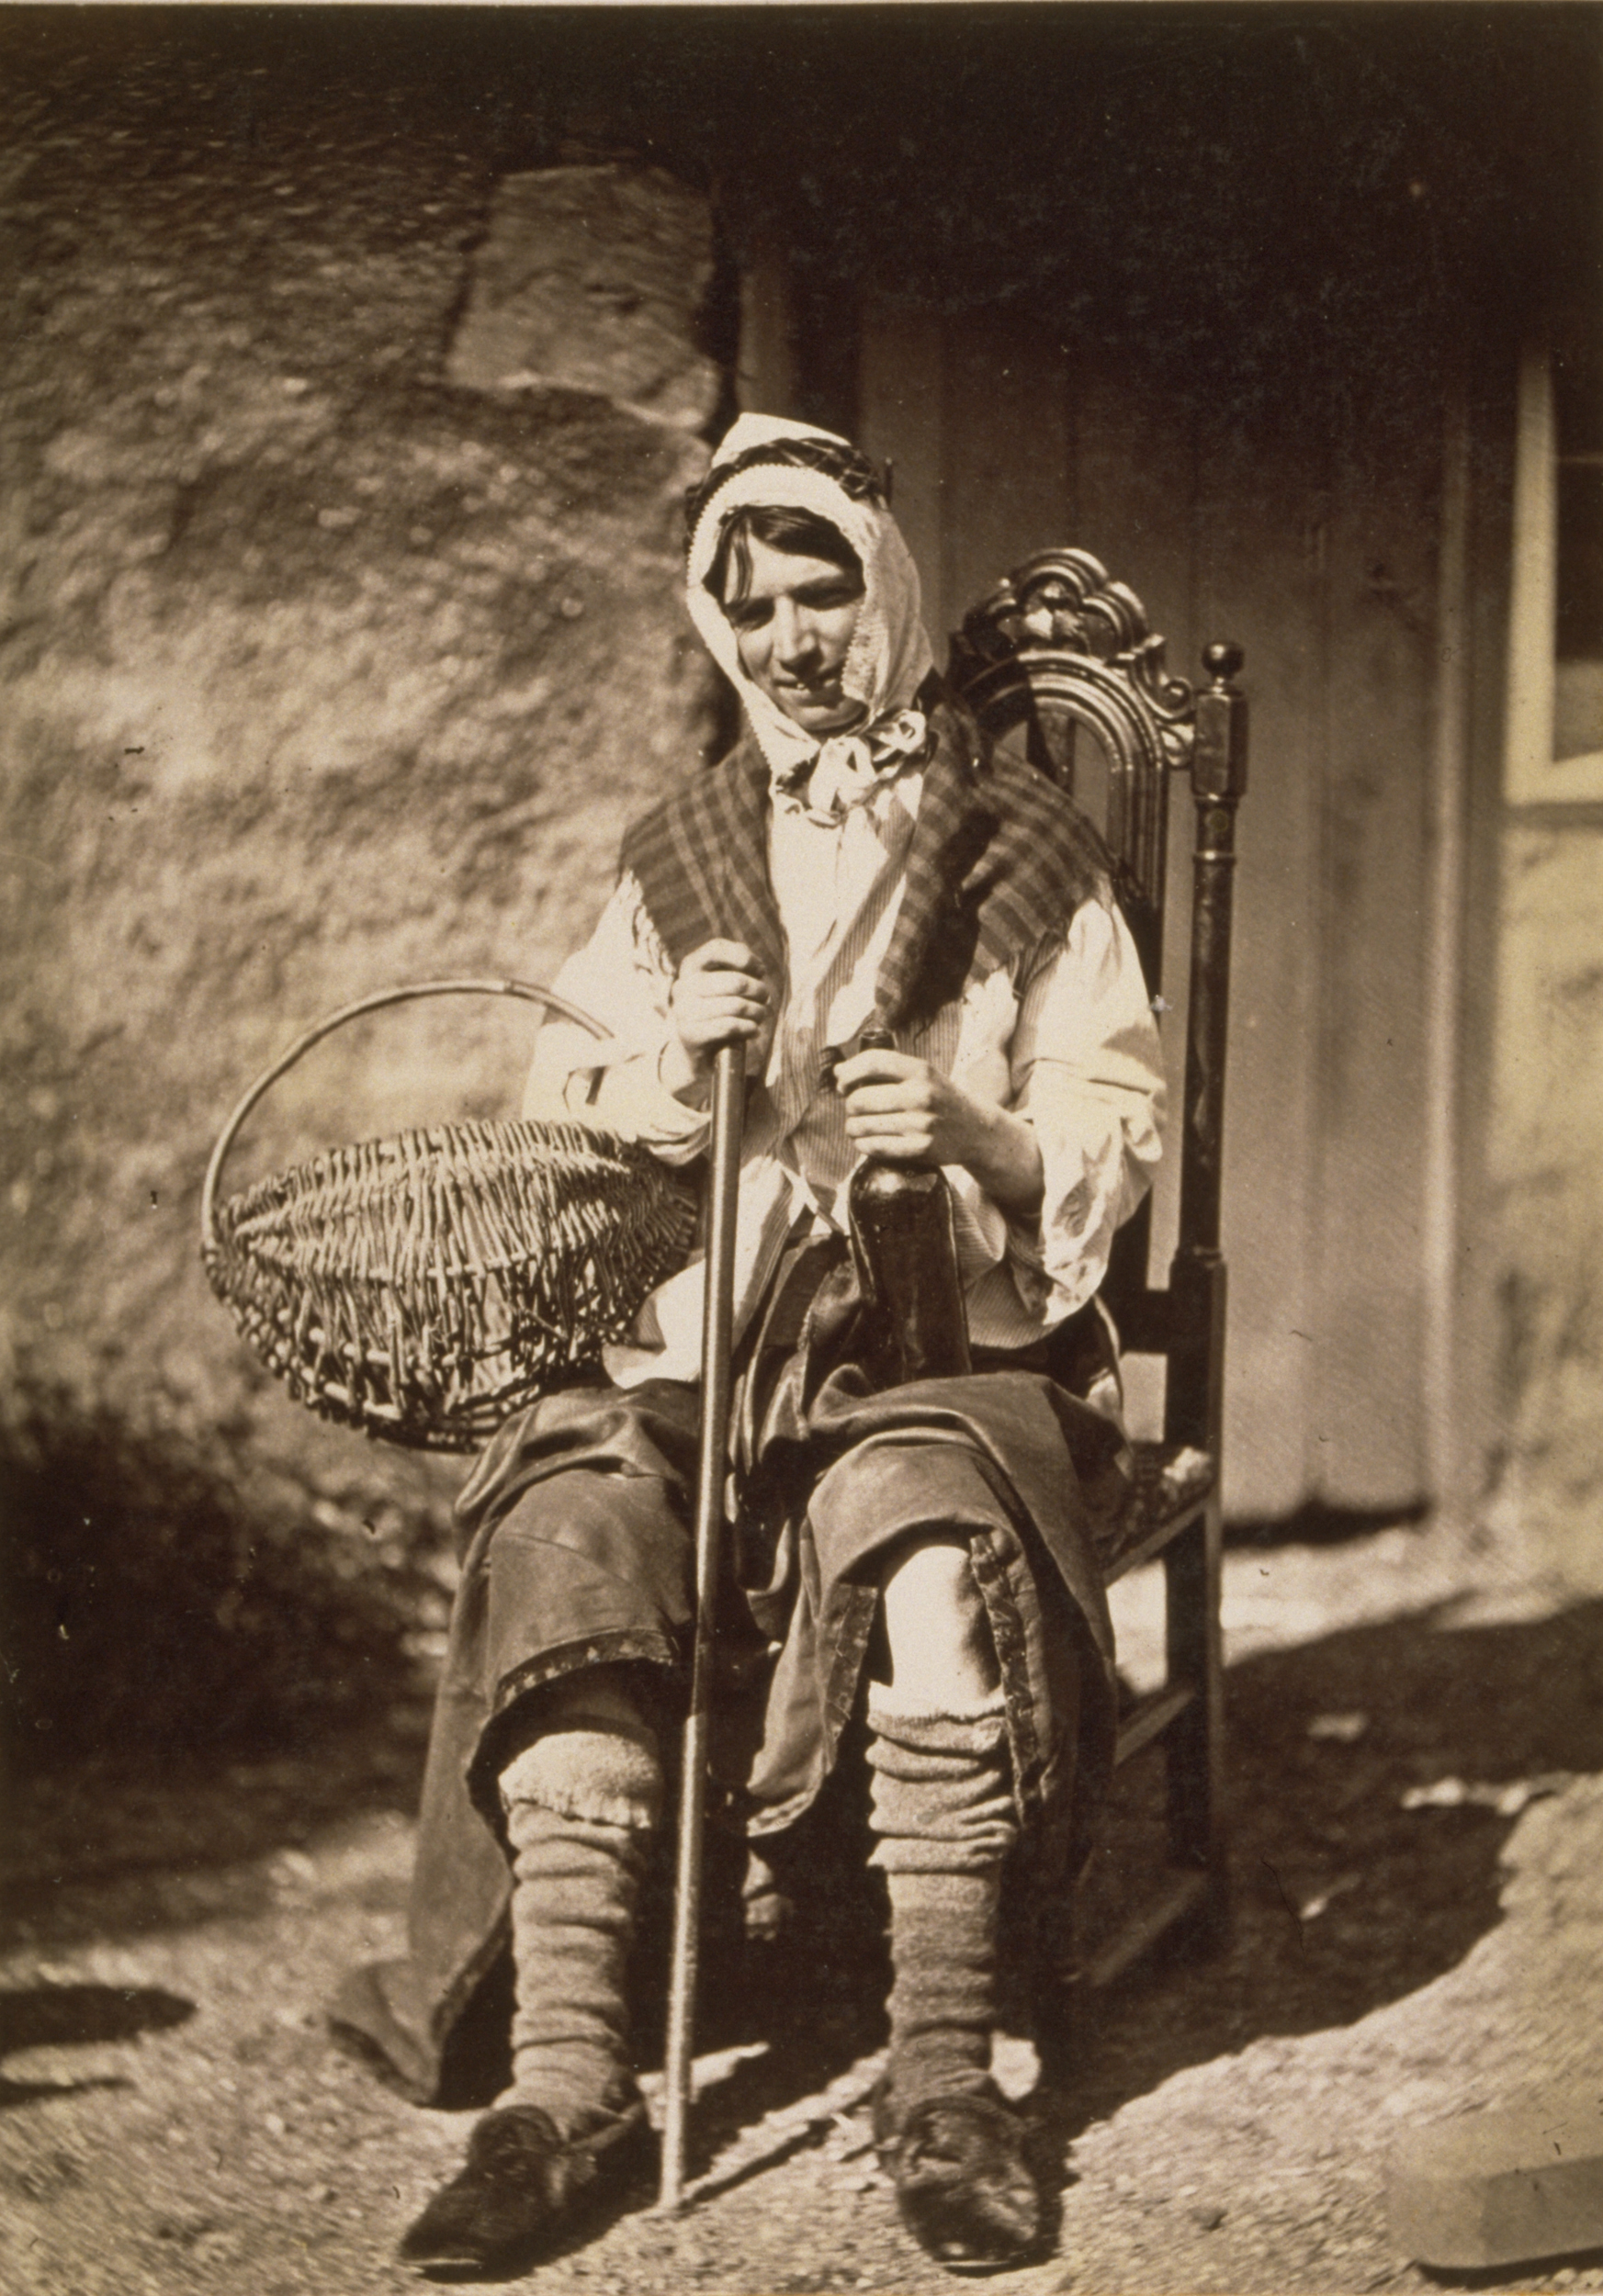 Man (possibly John Rodger, brother of photographer) posed as a fisherwoman, by Thomas Rodger, 1860. (St Andrews ALB-10-28)